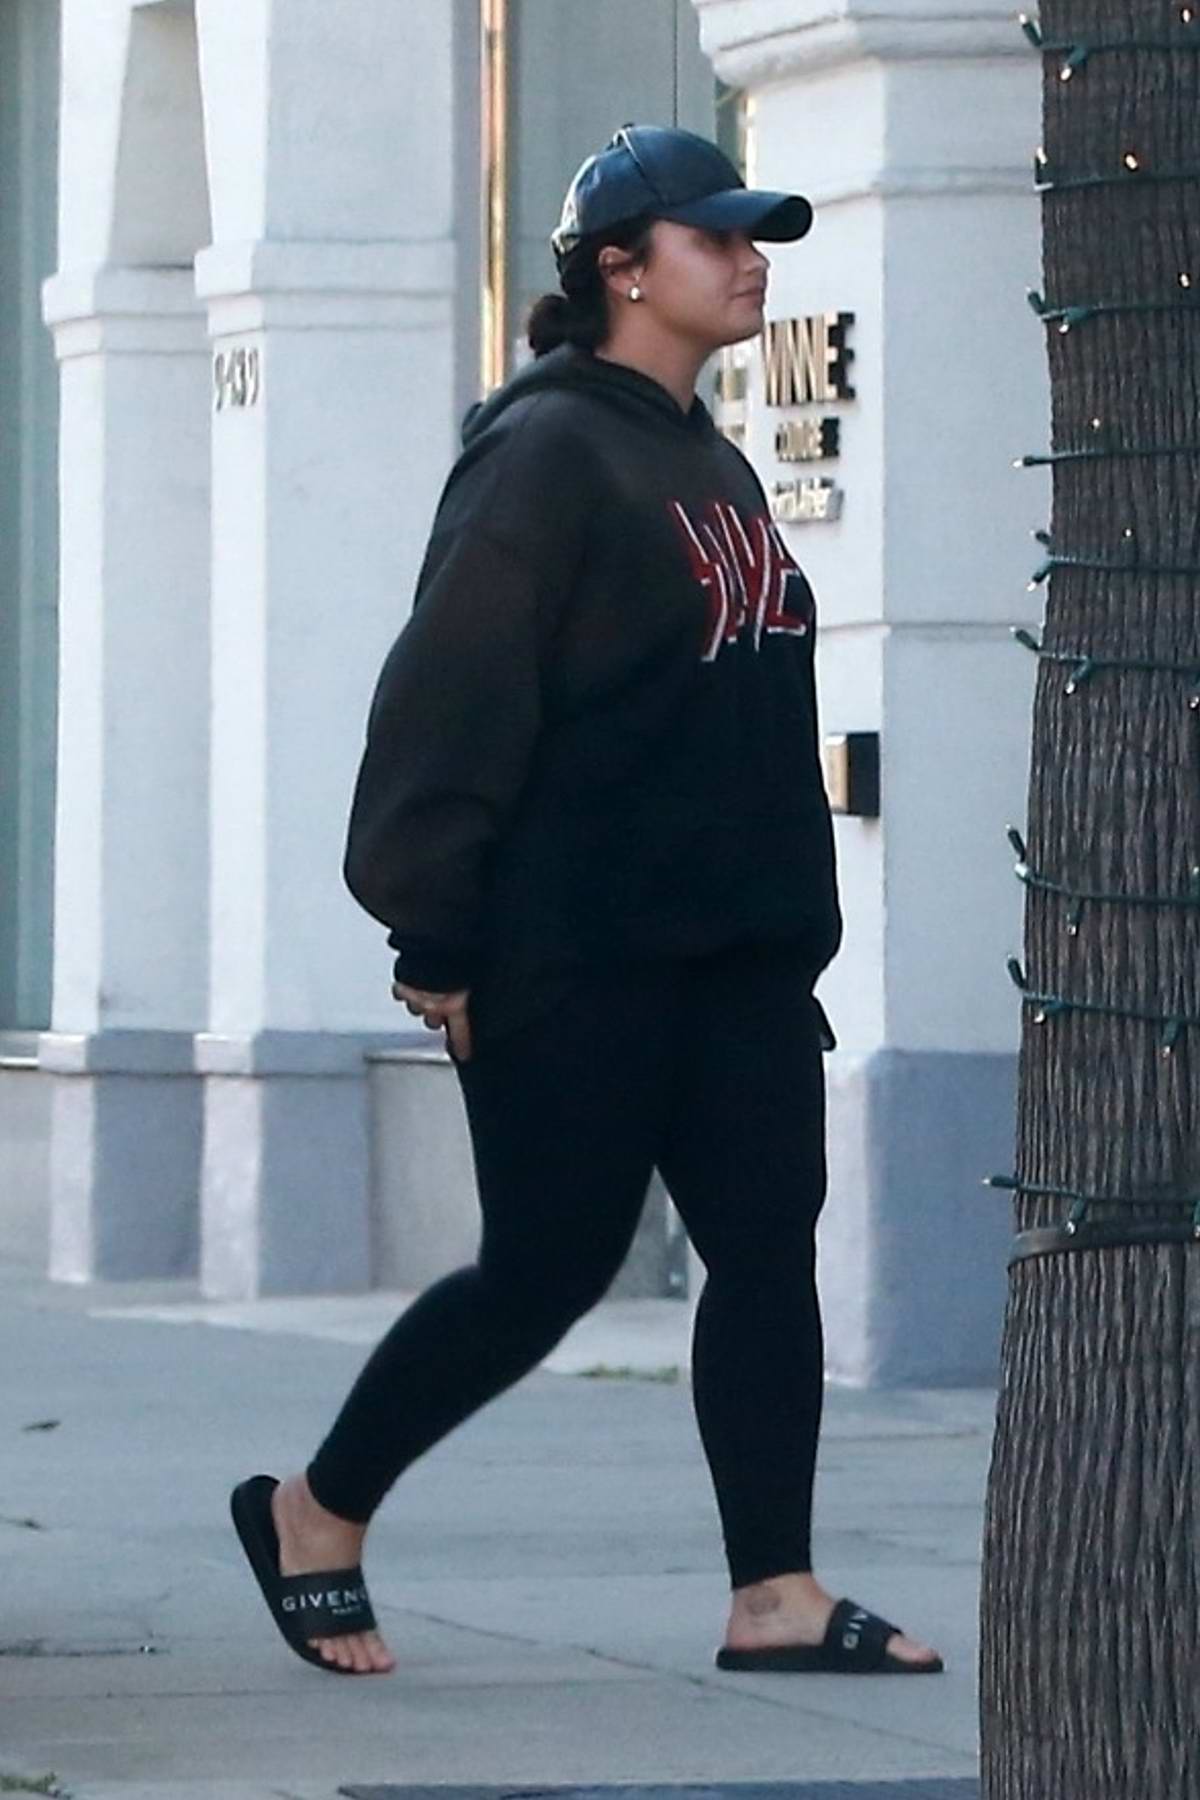 https://www.celebsfirst.com/wp-content/uploads/2019/03/demi-lovato-keeps-it-casual-with-a-black-hoodie-and-leggings-as-she-steps-out-for-some-shopping-in-beverly-hills-los-angeles-150319_2.jpg